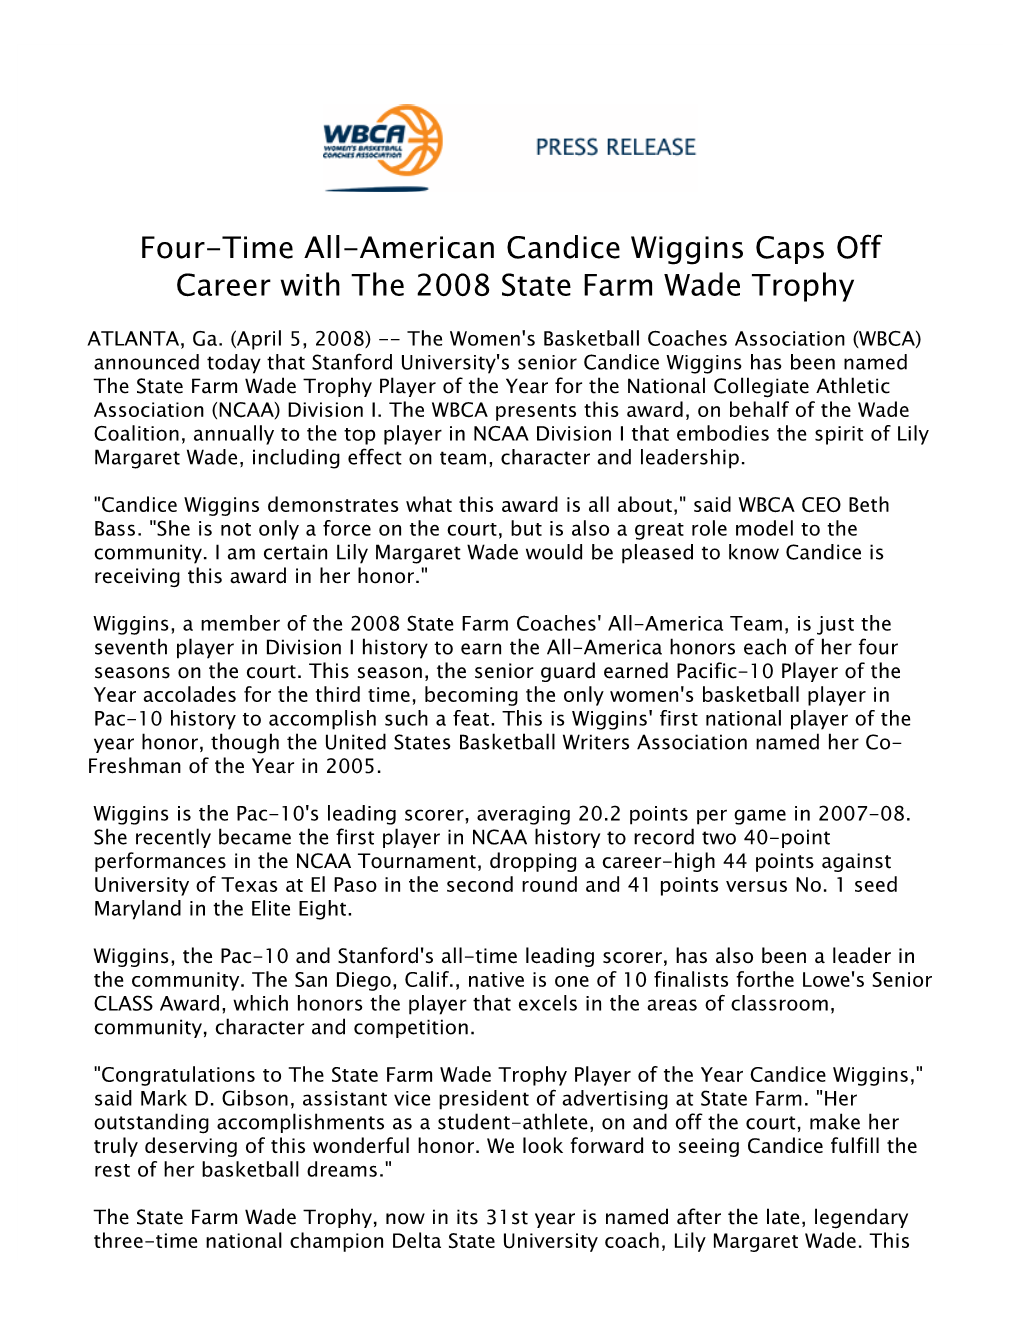 Four-Time All-American Candice Wiggins Caps Off Career with the 2008 State Farm Wade Trophy